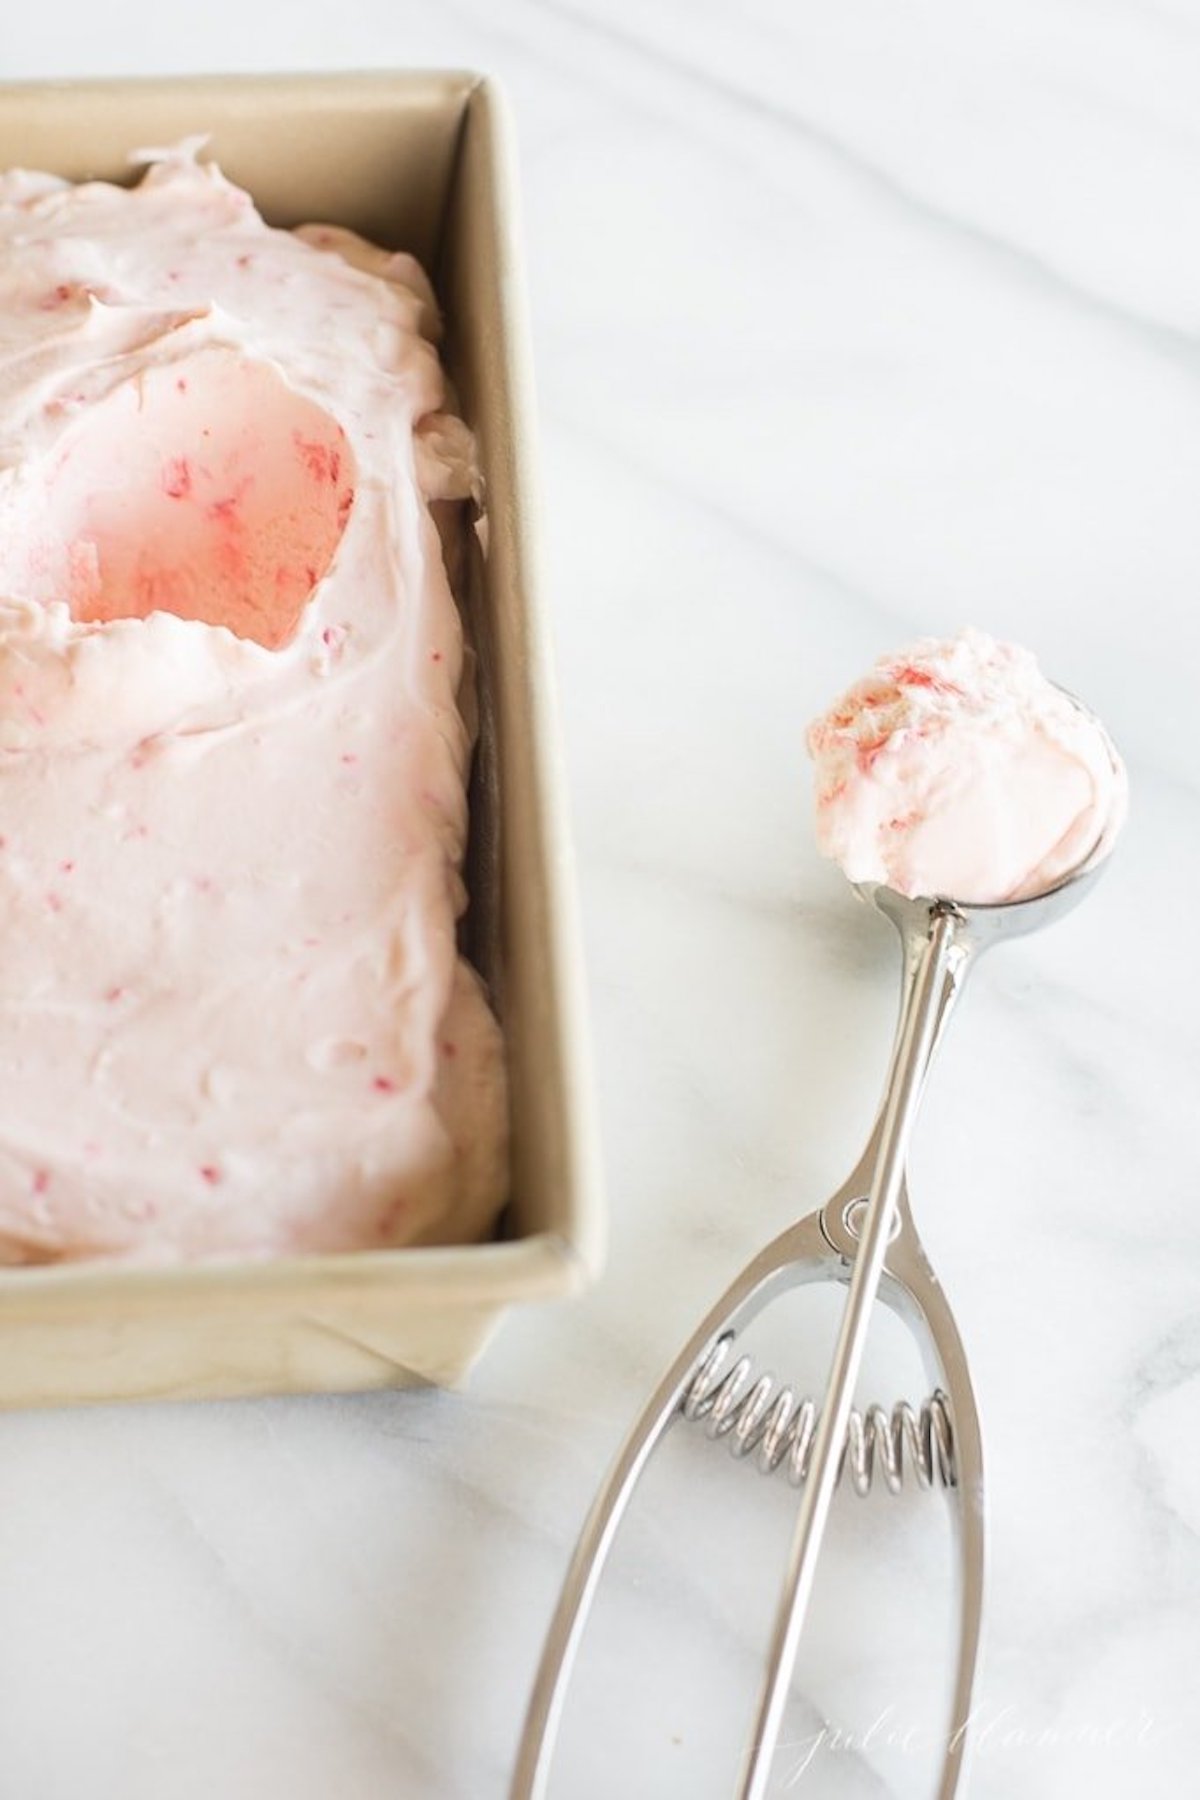 Peppermint-infused strawberry ice cream in a pan, expertly blended with a spatula.